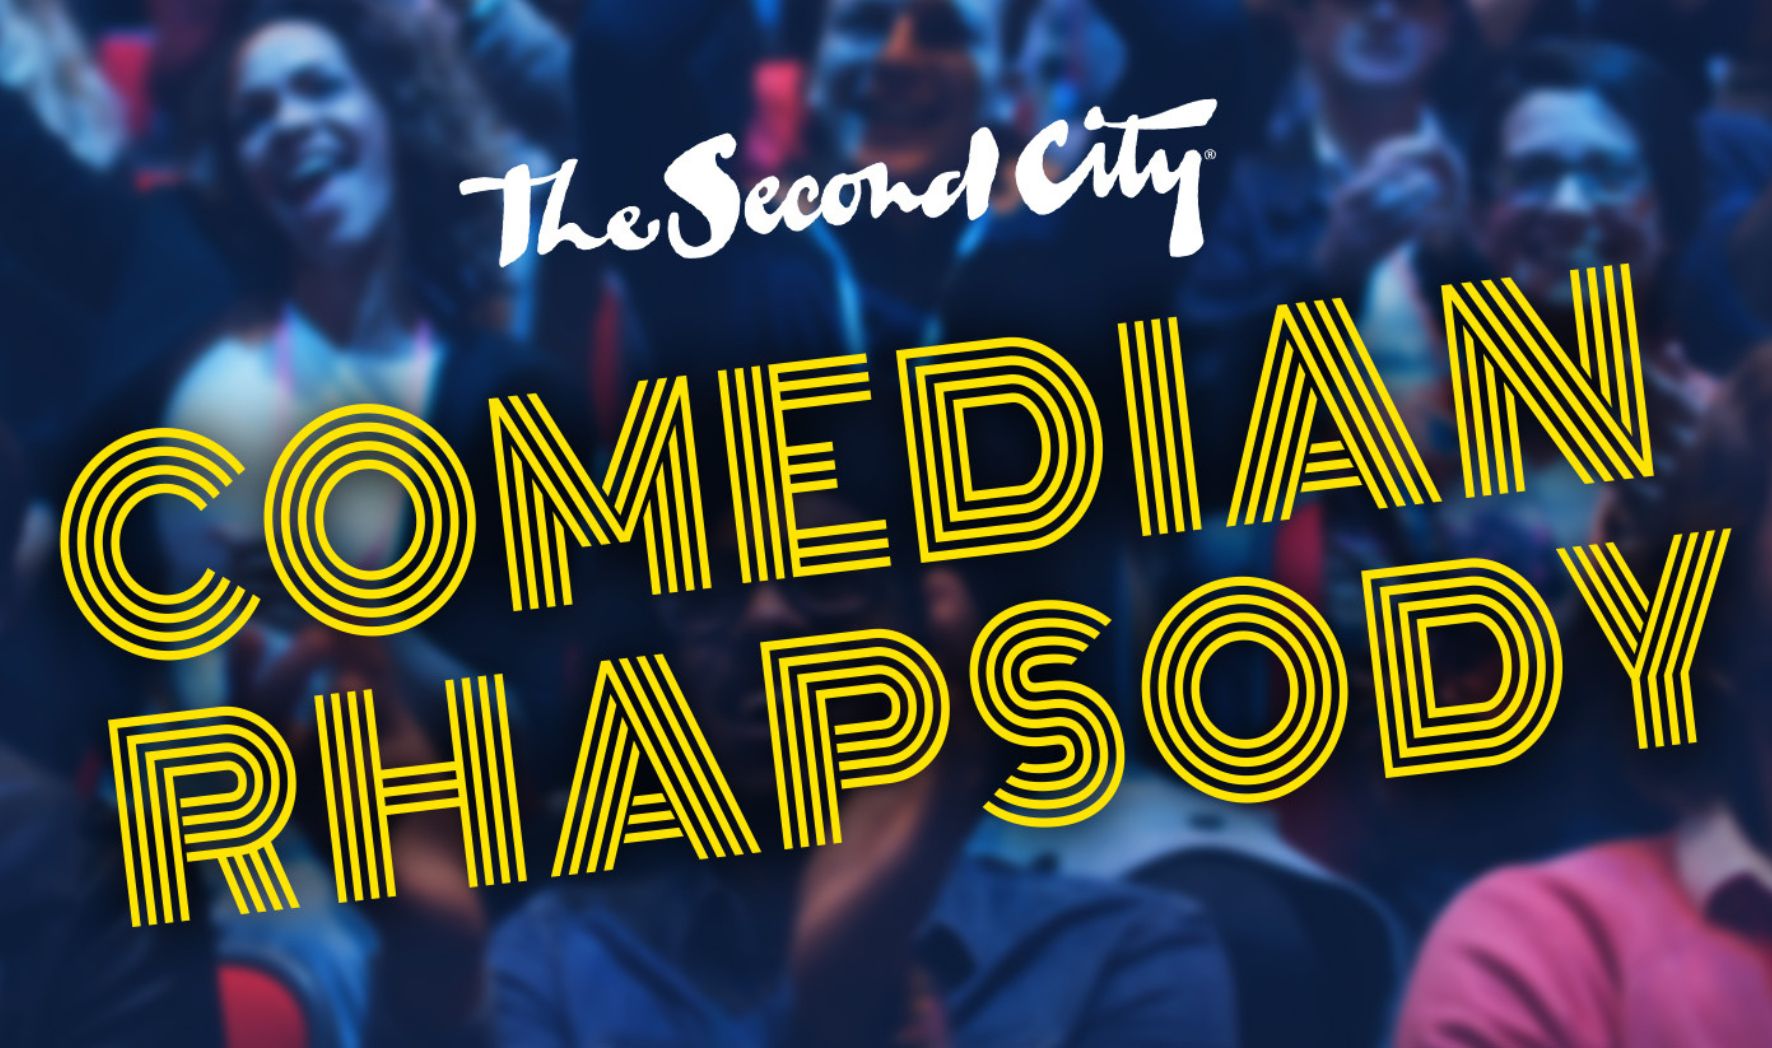 More Info for The Second City’s Comedian Rhapsody